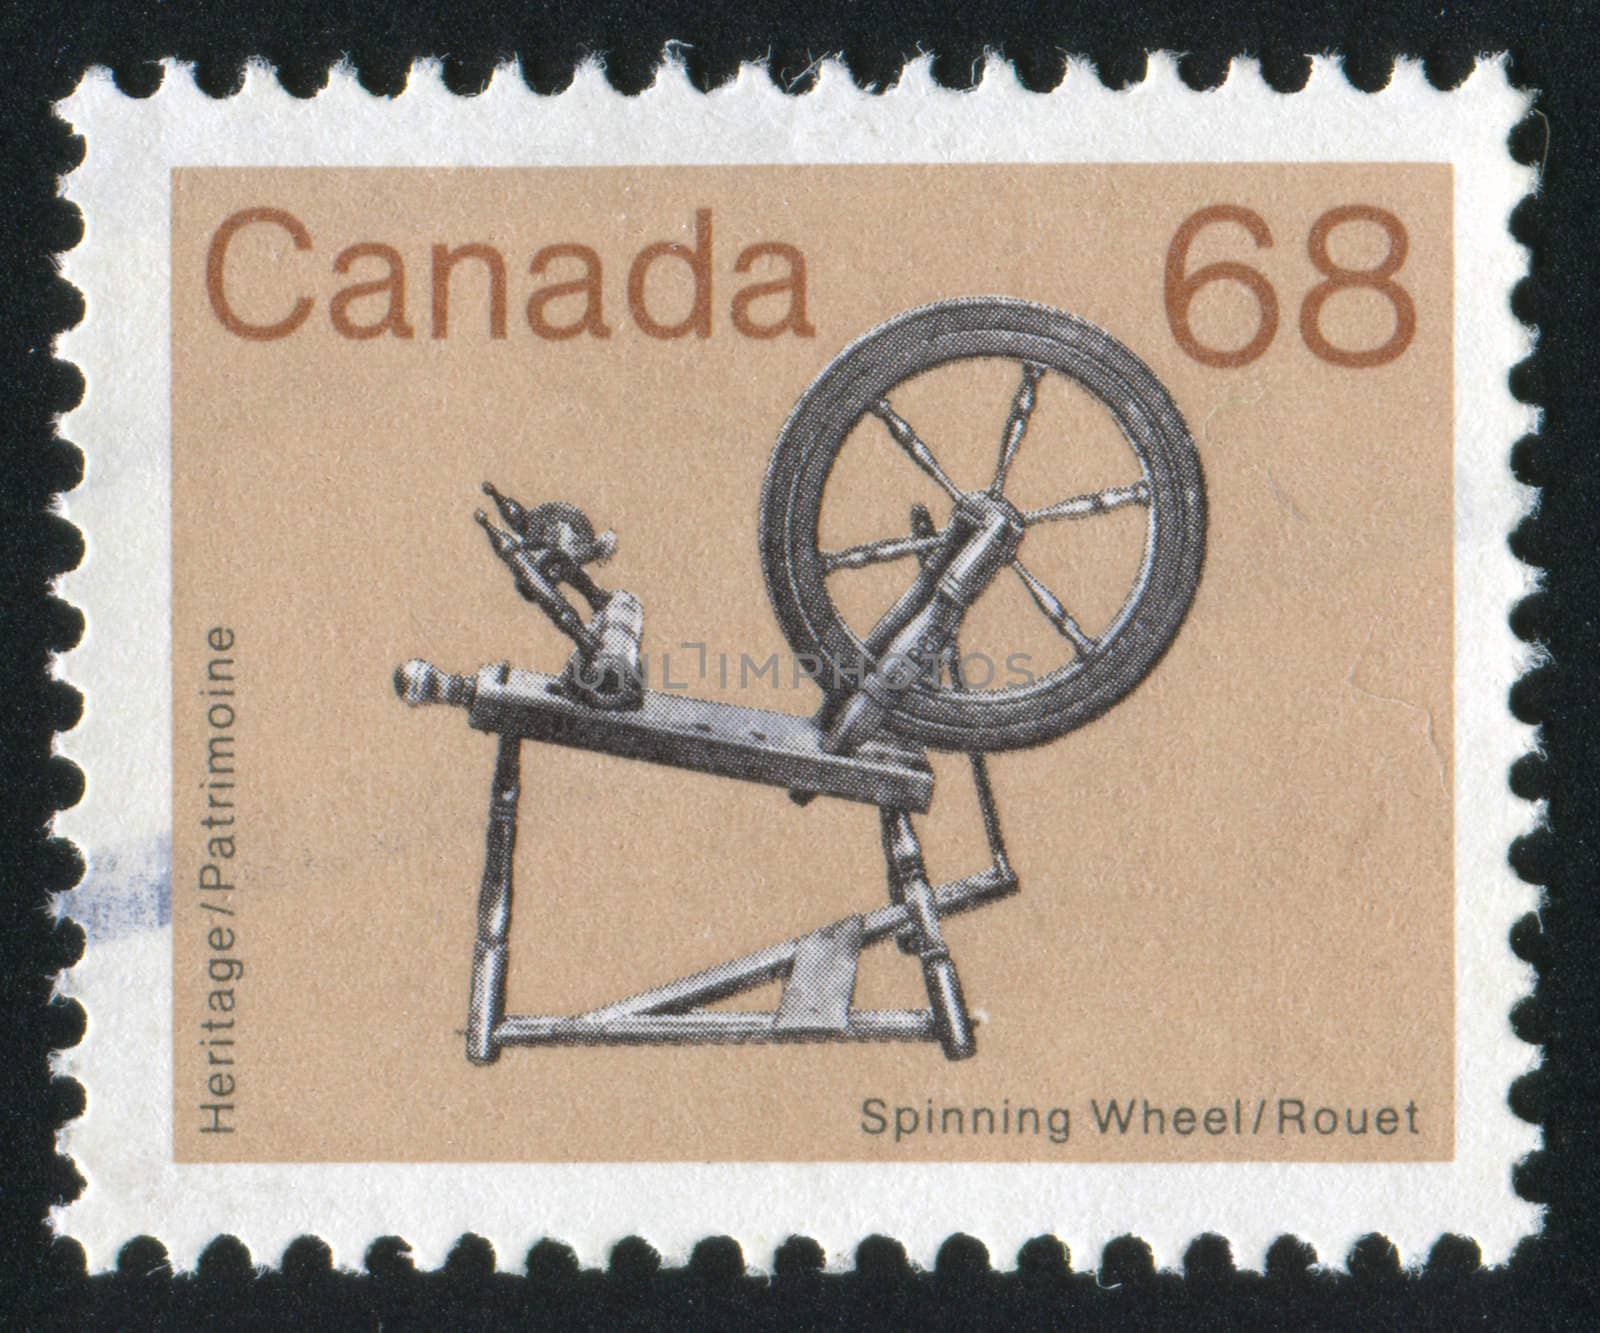 CANADA - CIRCA 1983: stamp printed by Canada, shows Heritage Artifacts, circa 1983